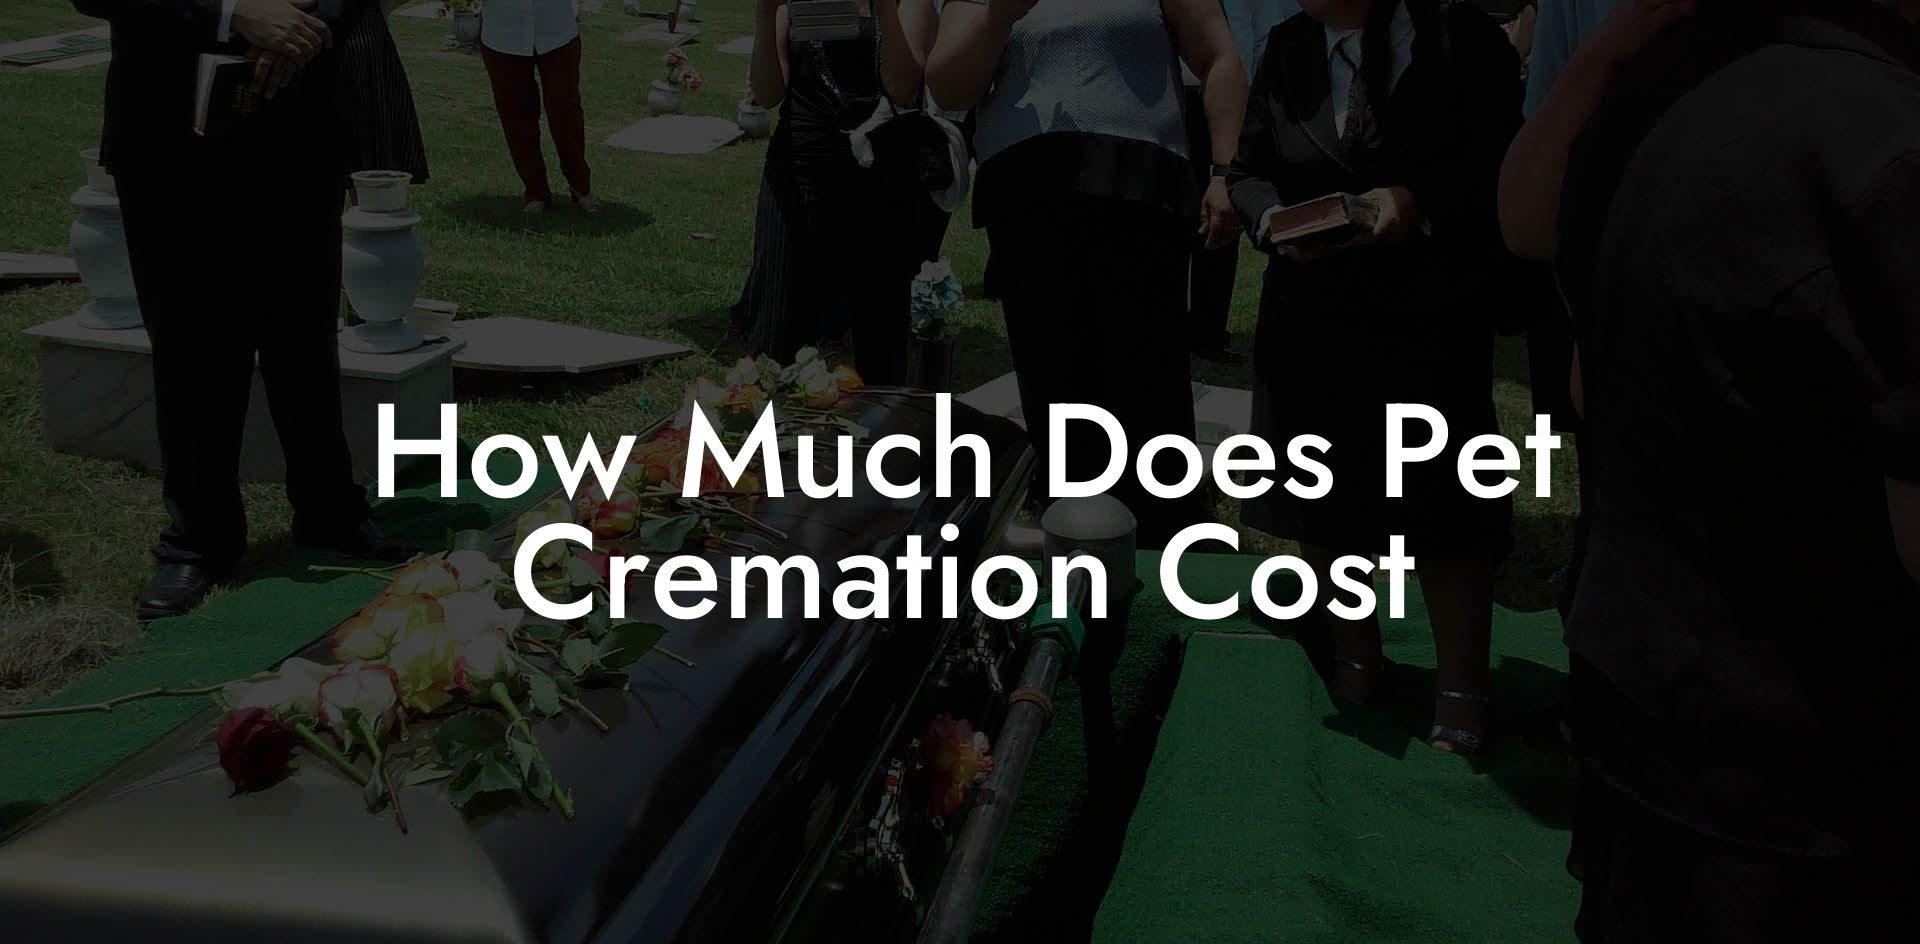 How Much Does Pet Cremation Cost